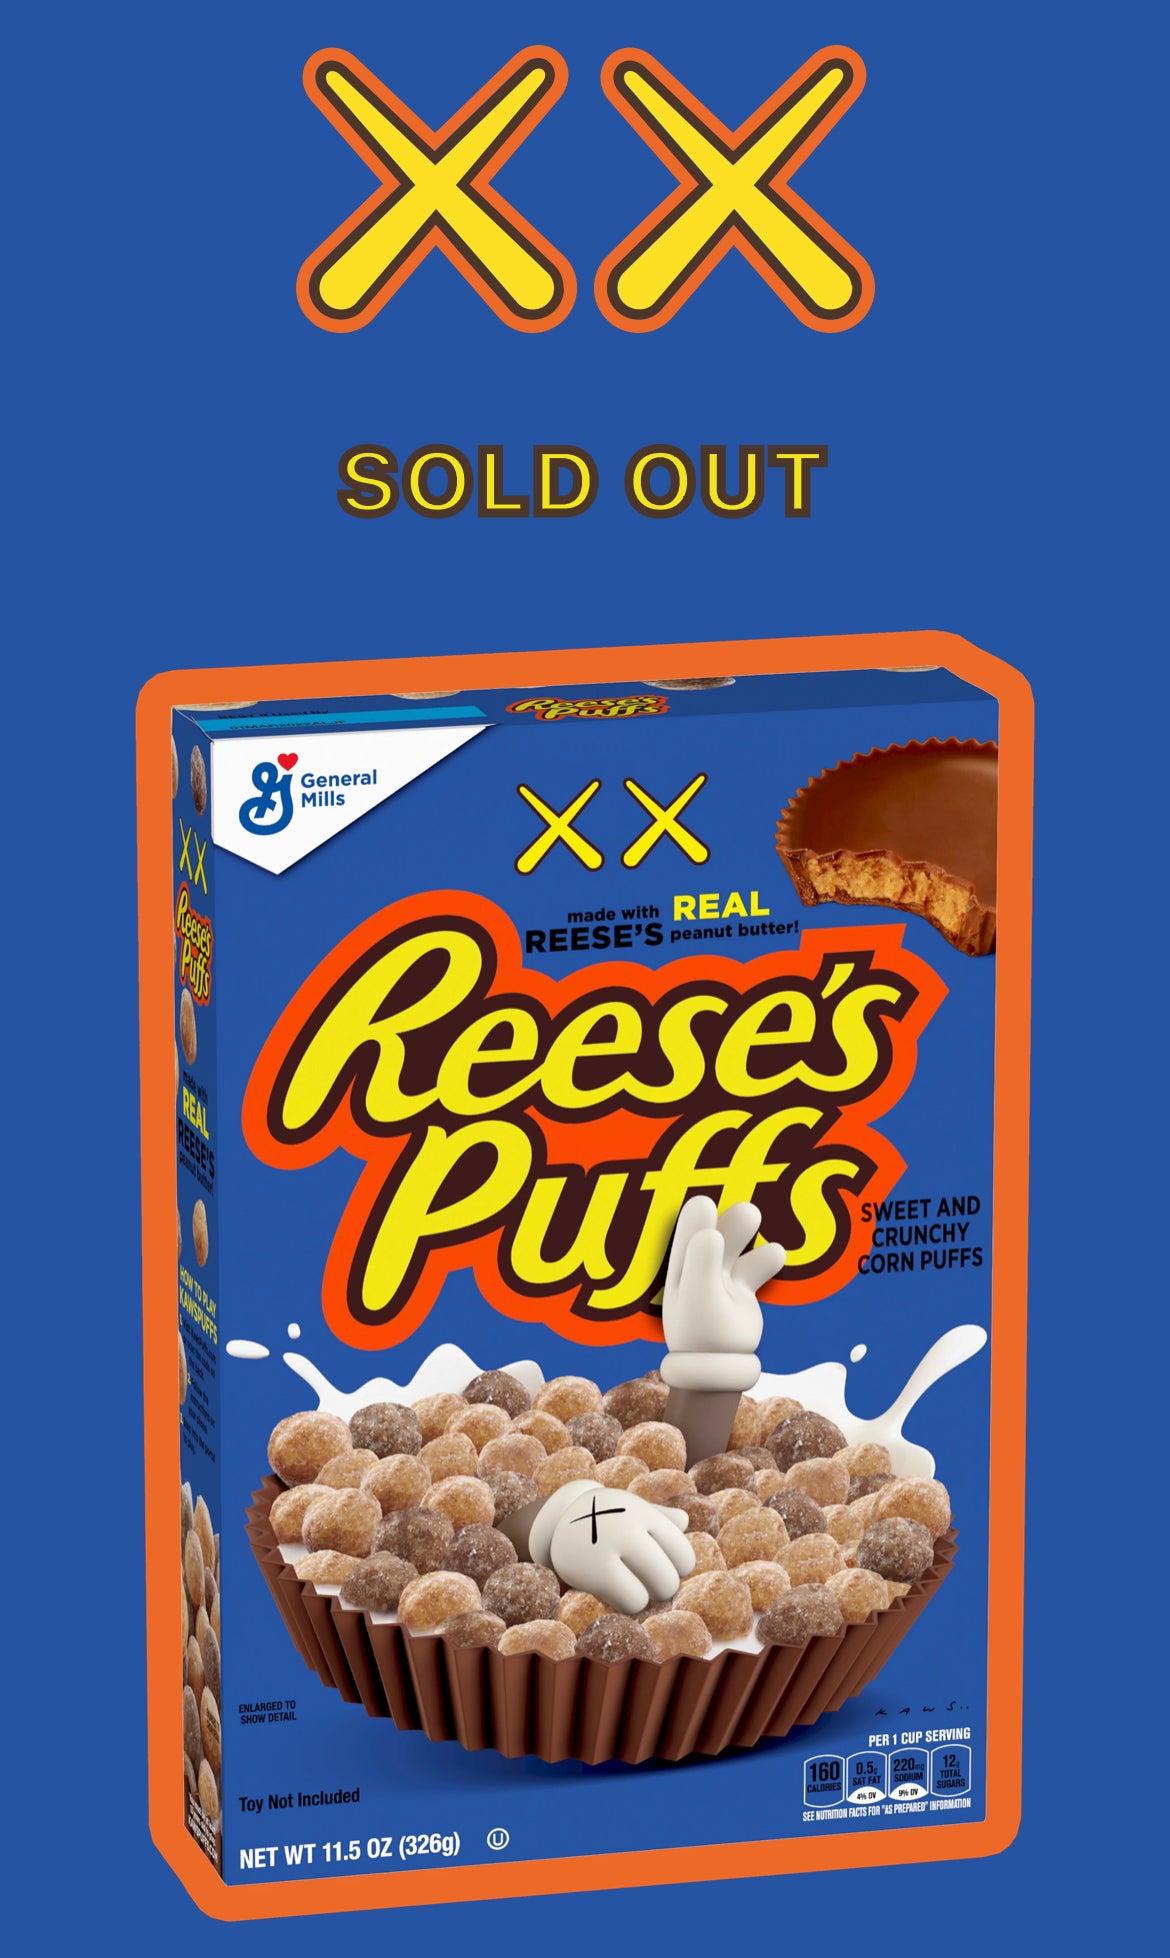 Kaws x Reese’s Puff Cereal